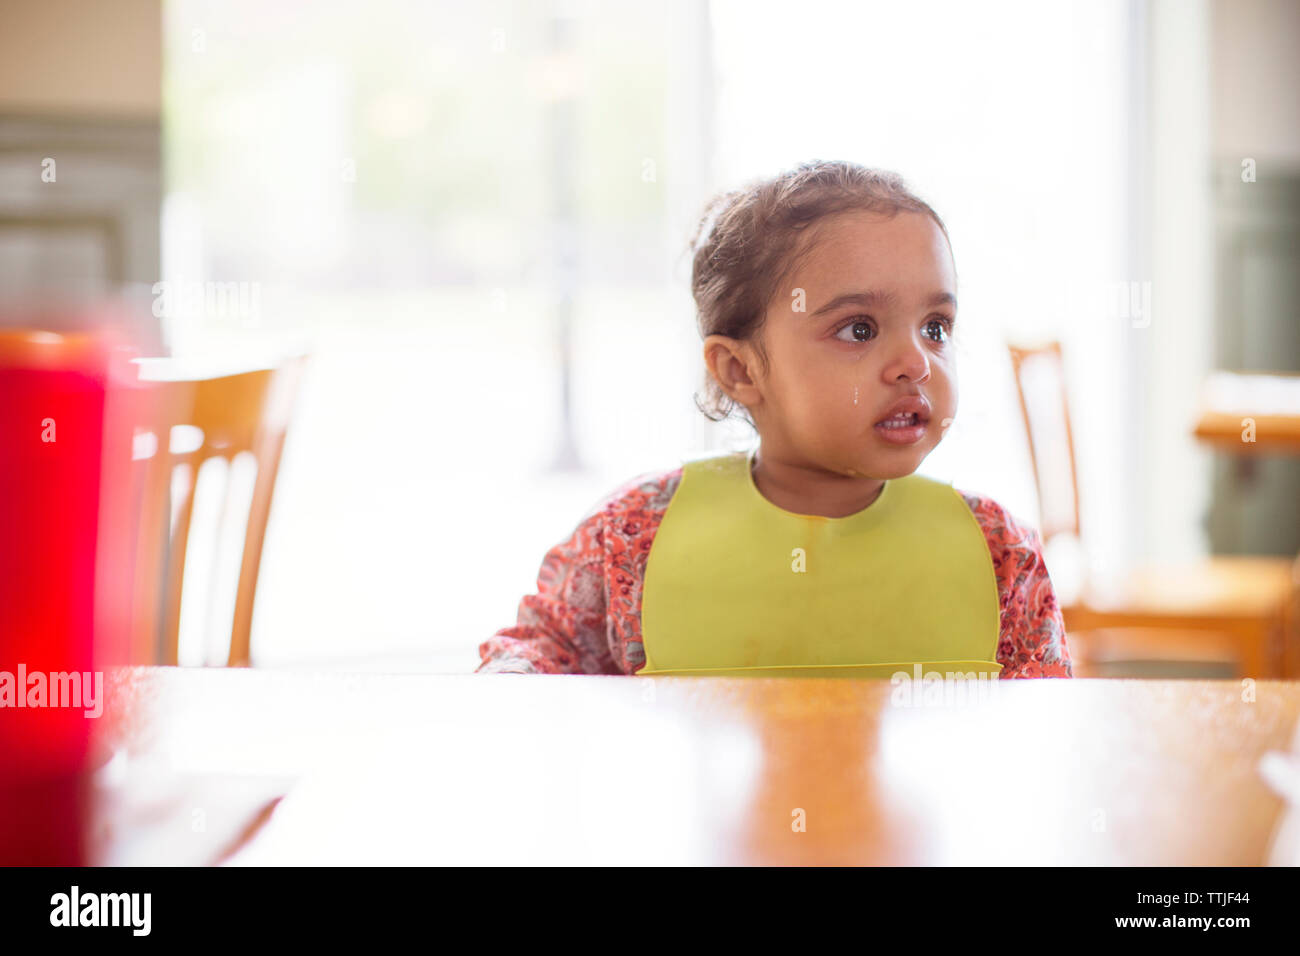 Girl crying while sitting at table in restaurant Stock Photo